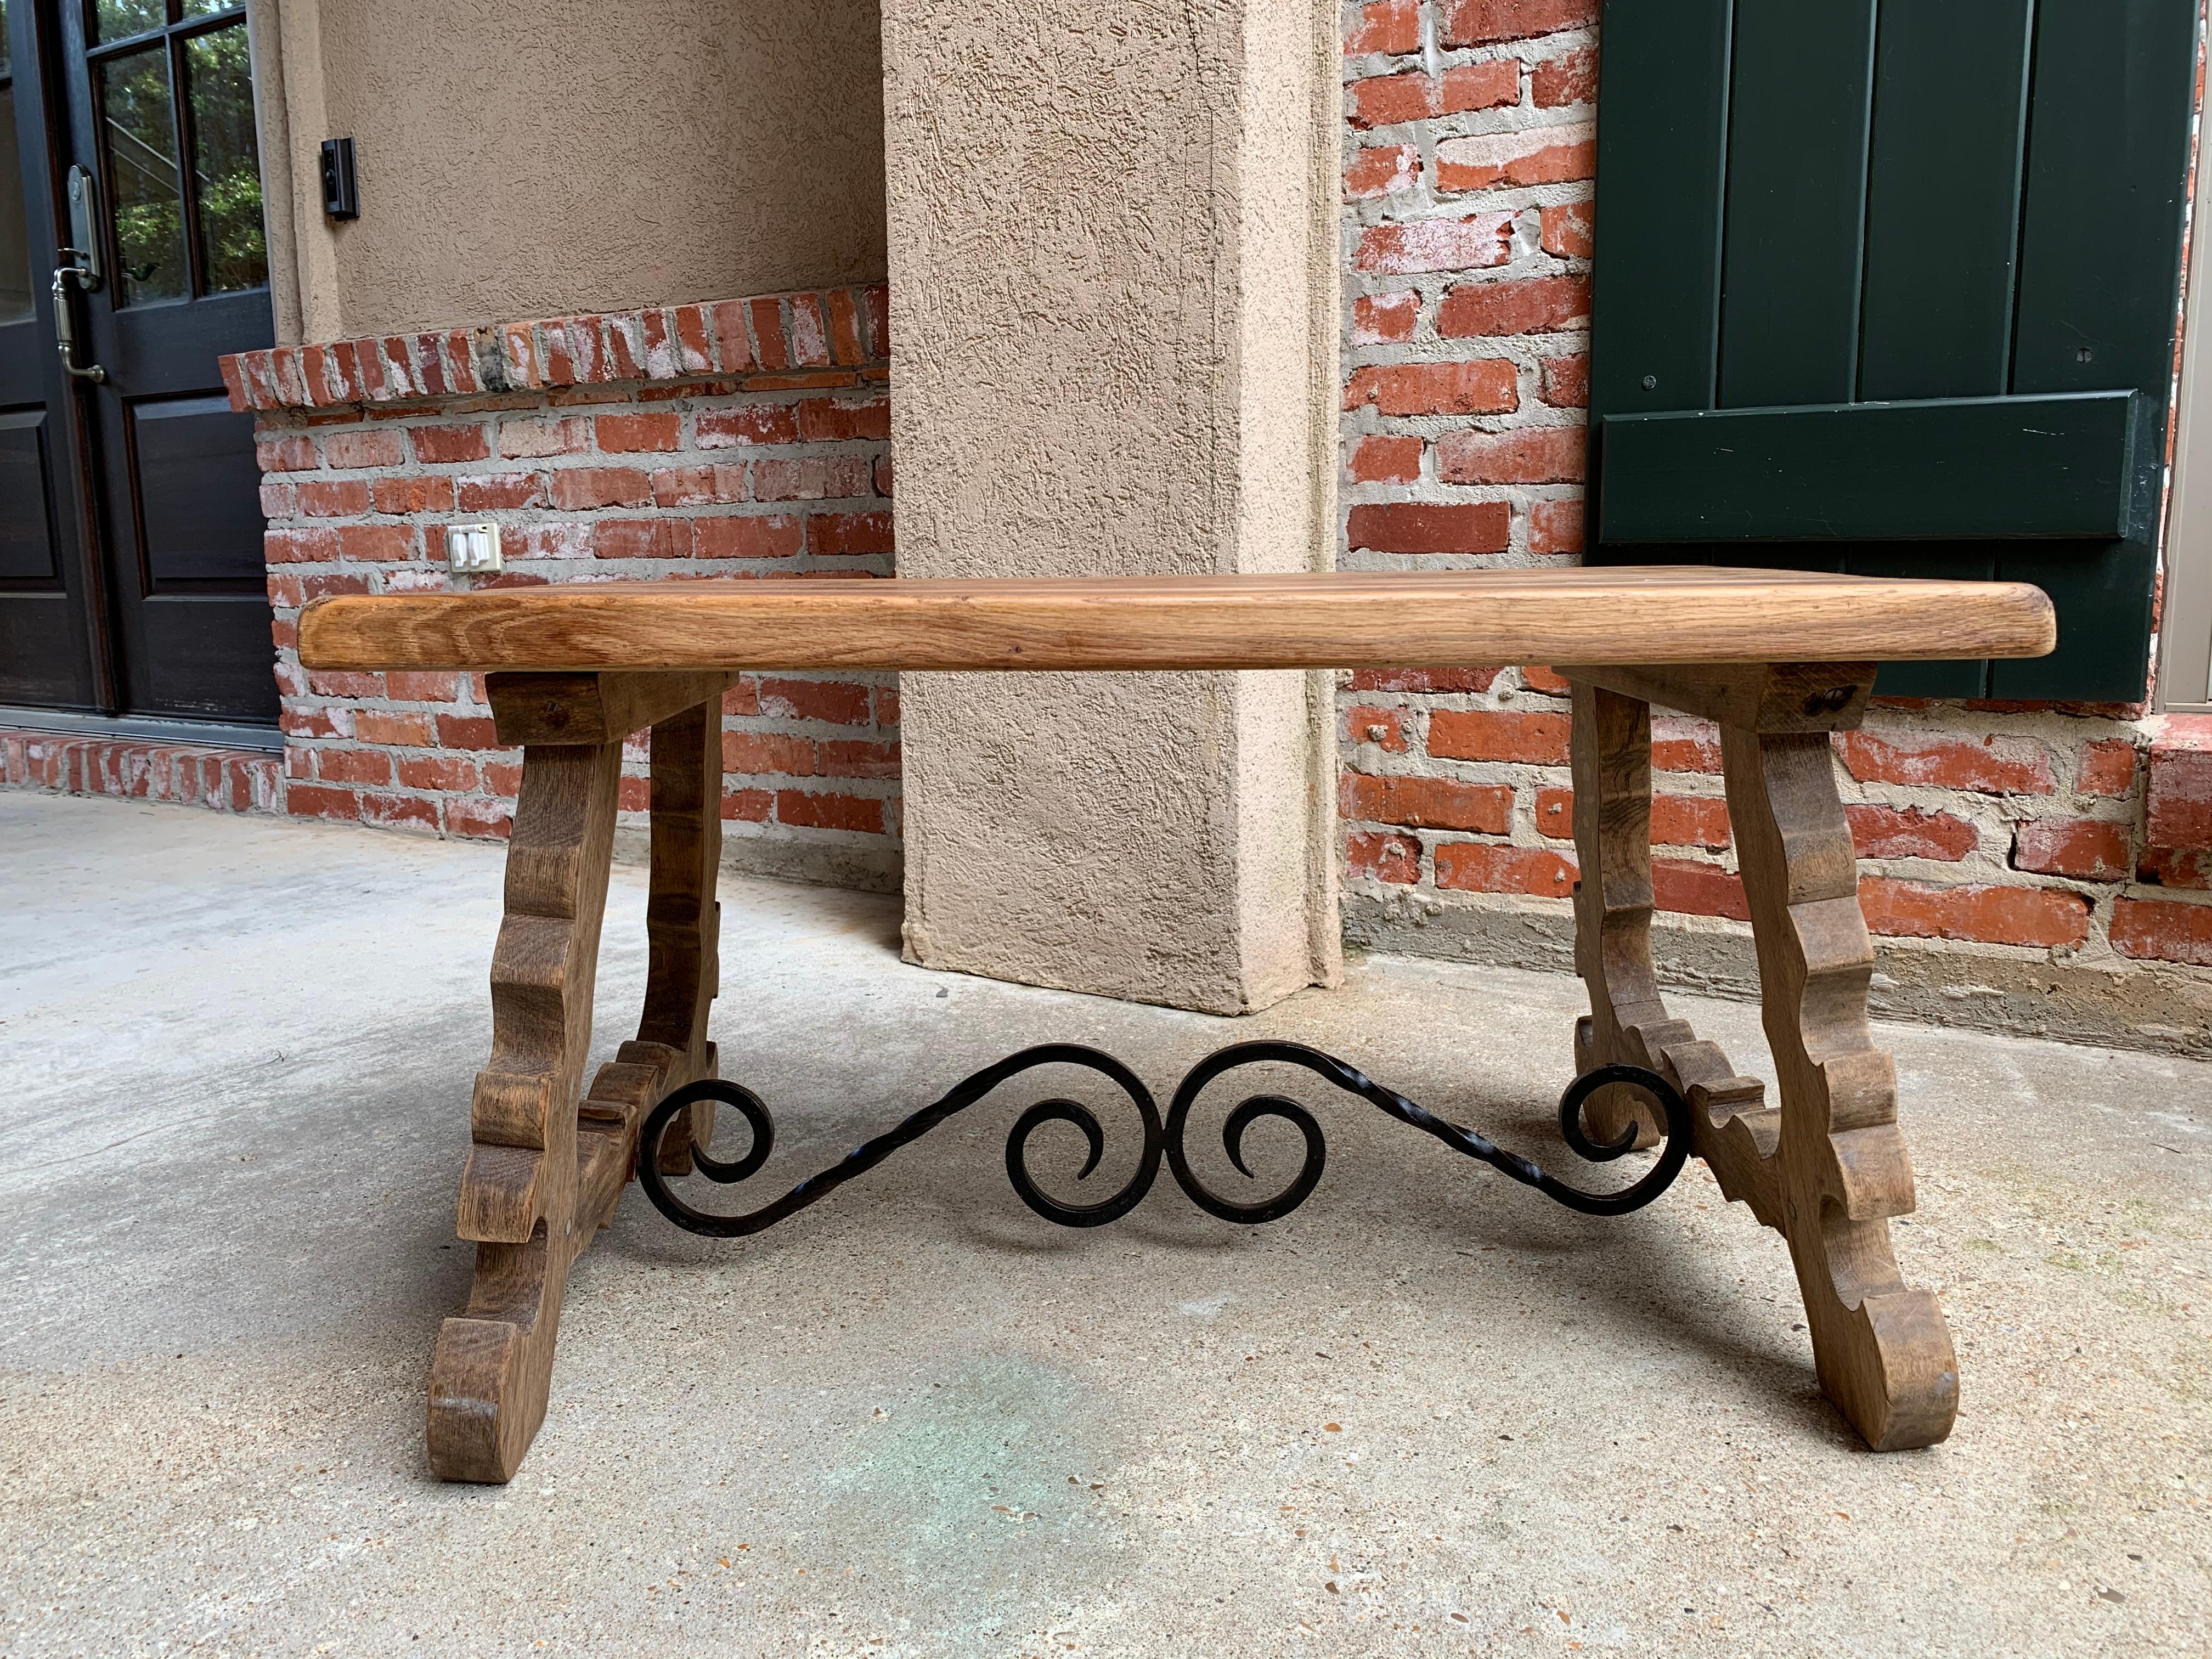 ~Direct from France~
~Gorgeous antique coffee table/bench with that Spanish Catalan style design that complements any décor from French country to farmhouse to traditional!~
~Distinctive style, with thick, solid oak plank top and thick,